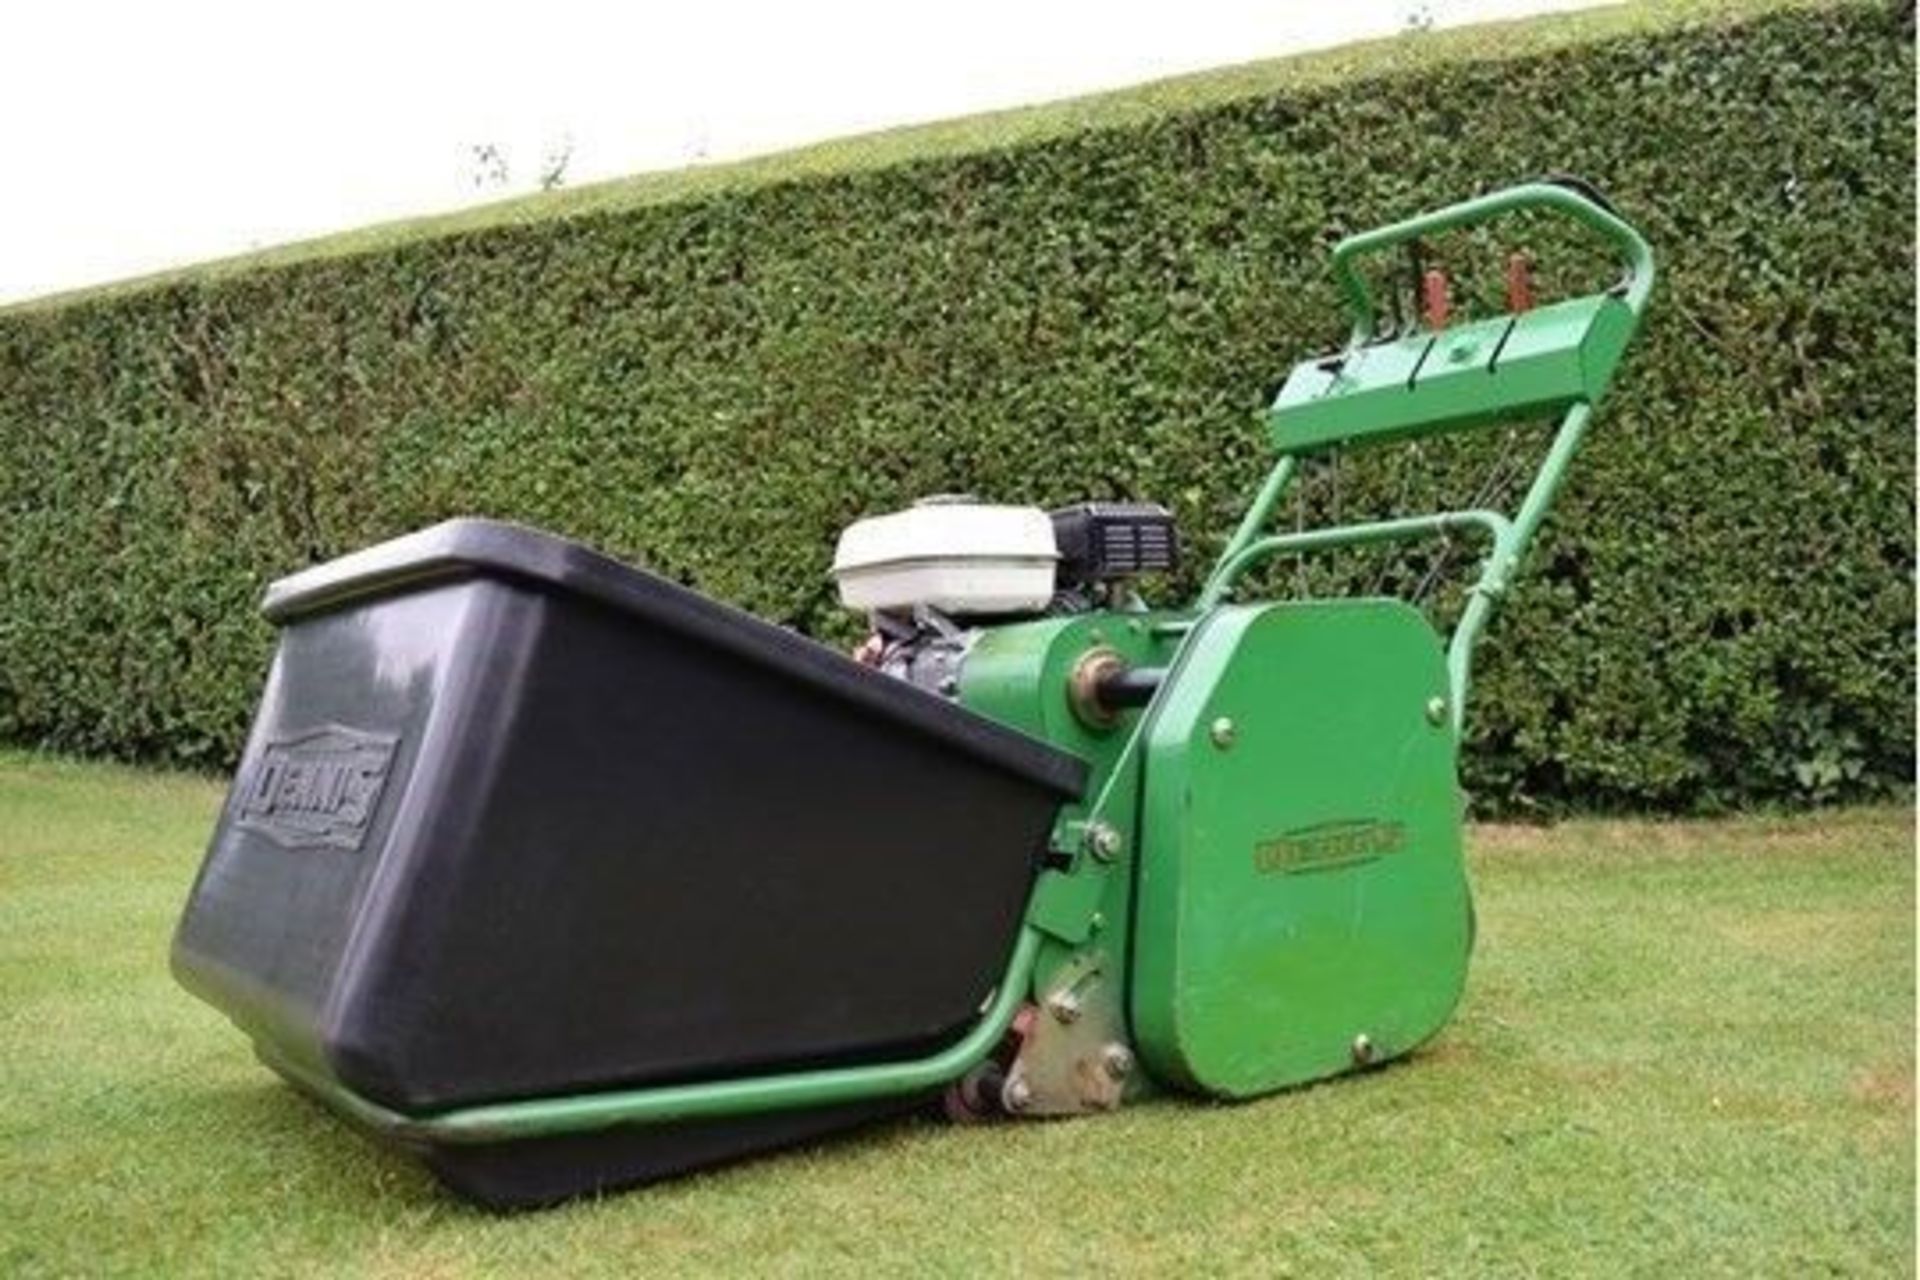 2004 Dennis G560 5 Blade Cylinder Mower With Grass Box - Image 9 of 11